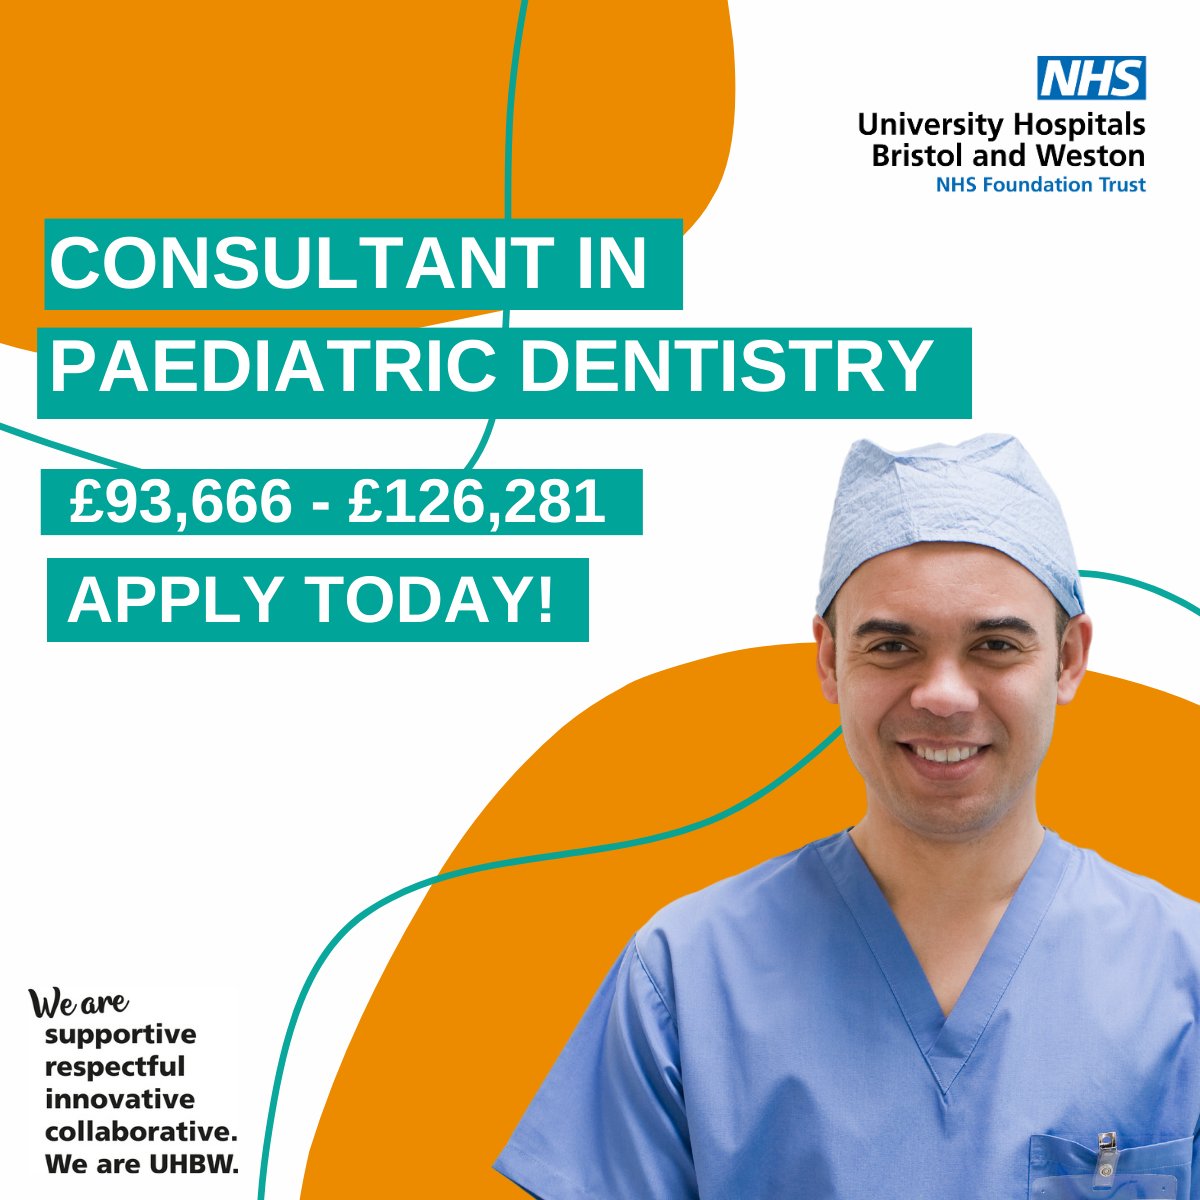 📣 We are looking for a Consultant in Paediatric Dentistry to join our friendly team at the Bristol Dental Hospital. Find out more and apply here: jobs.uhbristol.nhs.uk/job/v5971405 #BristolDental #DestistJobs #NHSJobs #TeamUHBW